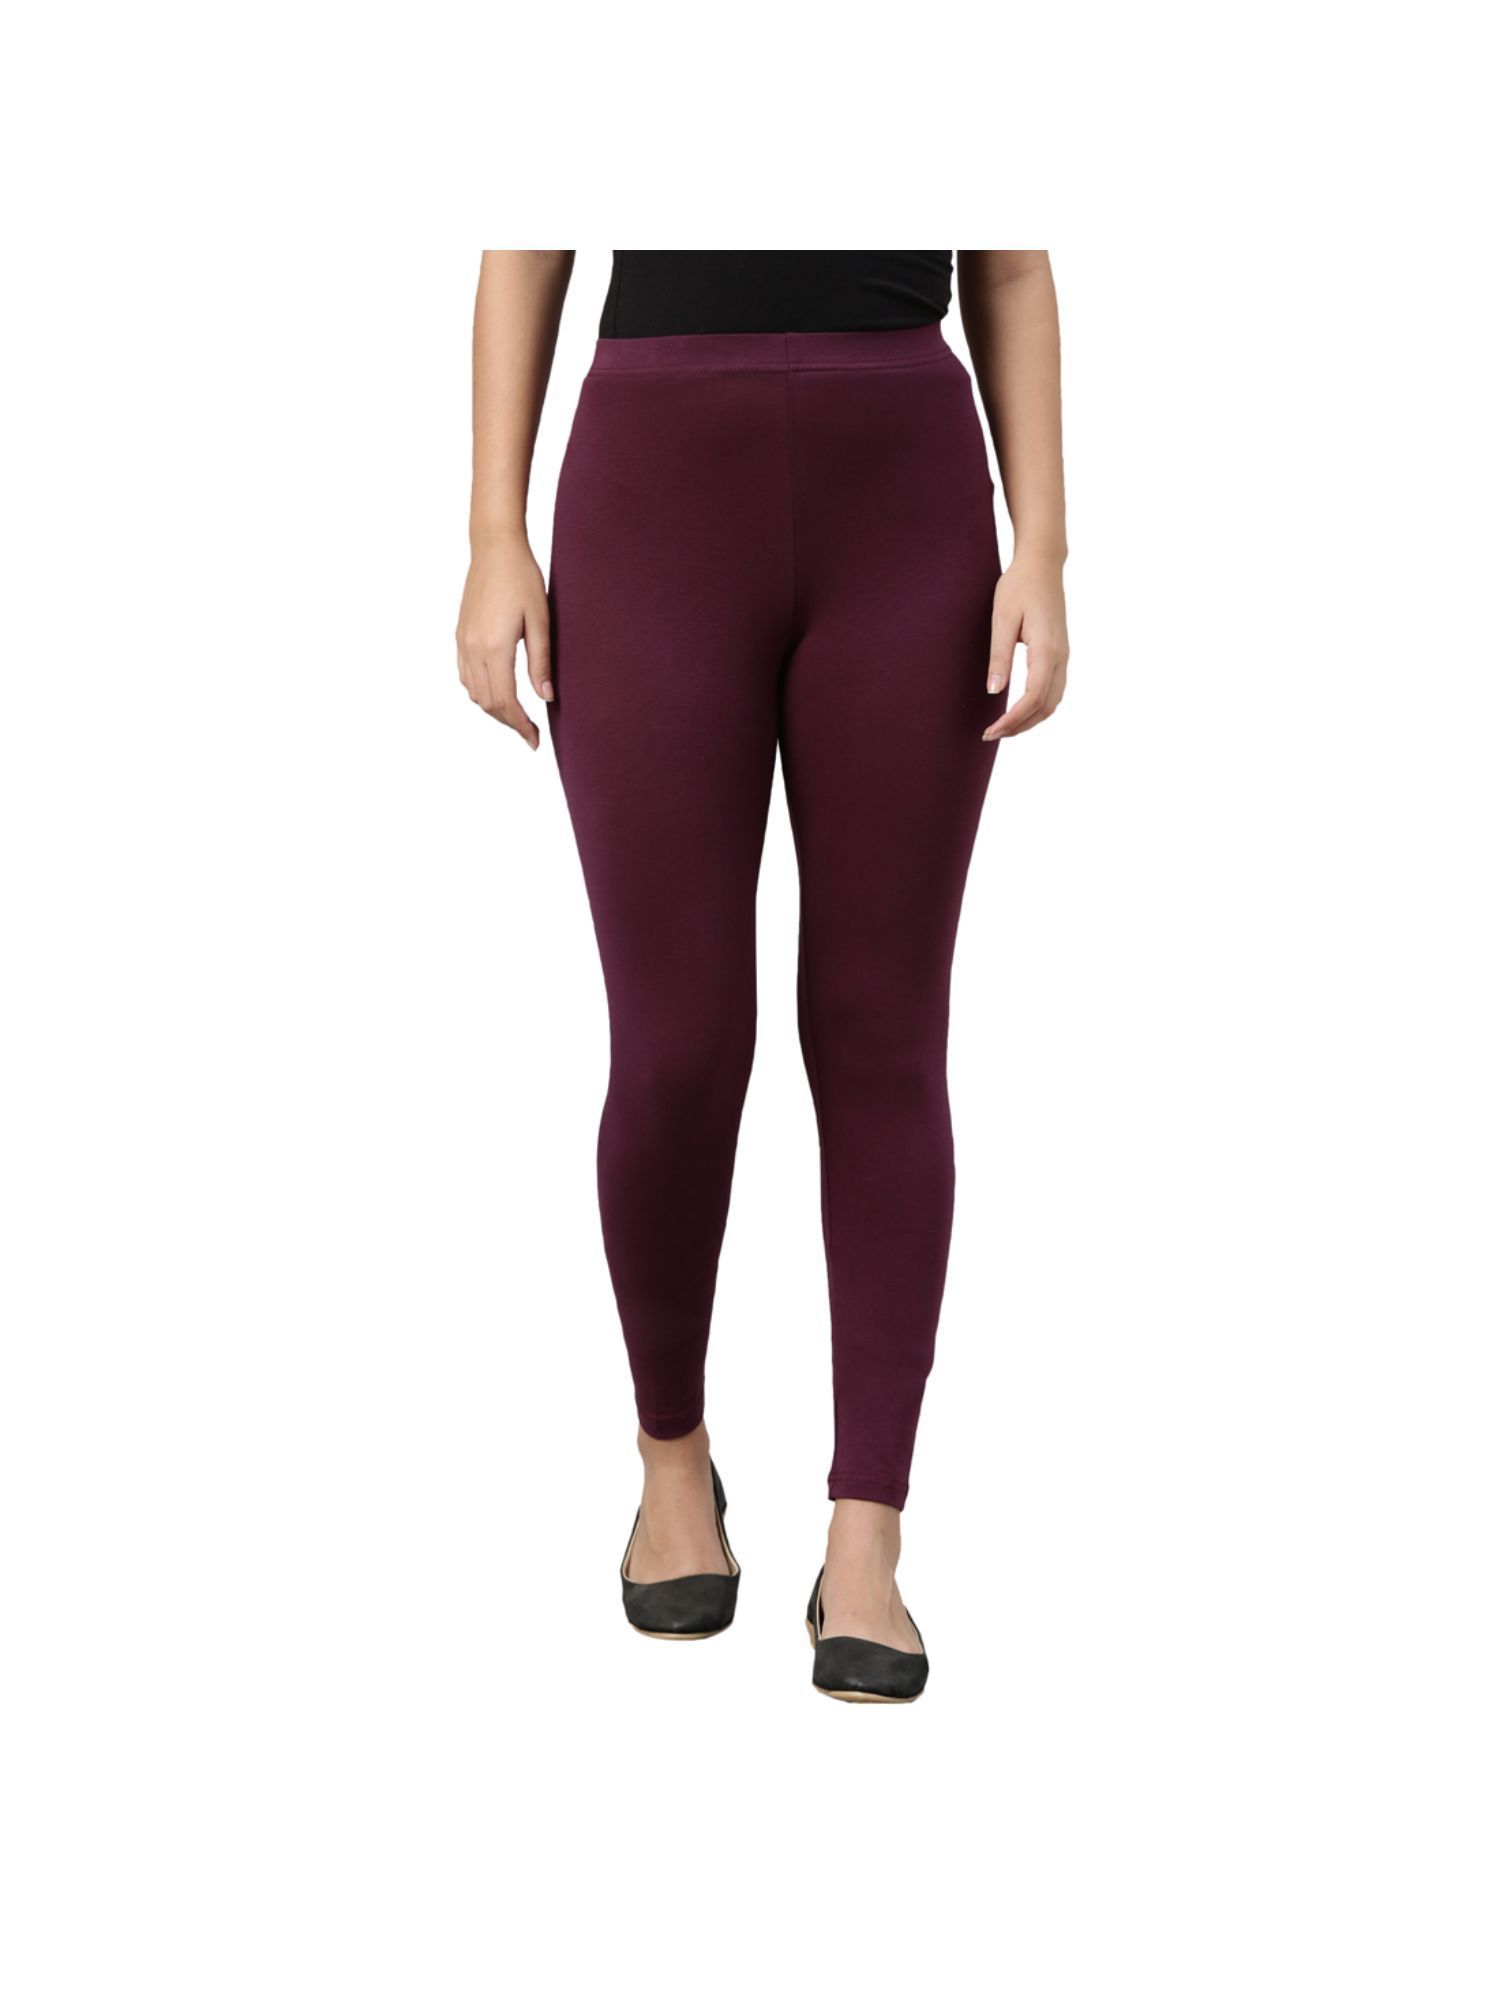 Buy Now Slim Fit Ankle-Length Leggings Maroon Color Cotton Knitted Leggings  – Lady India